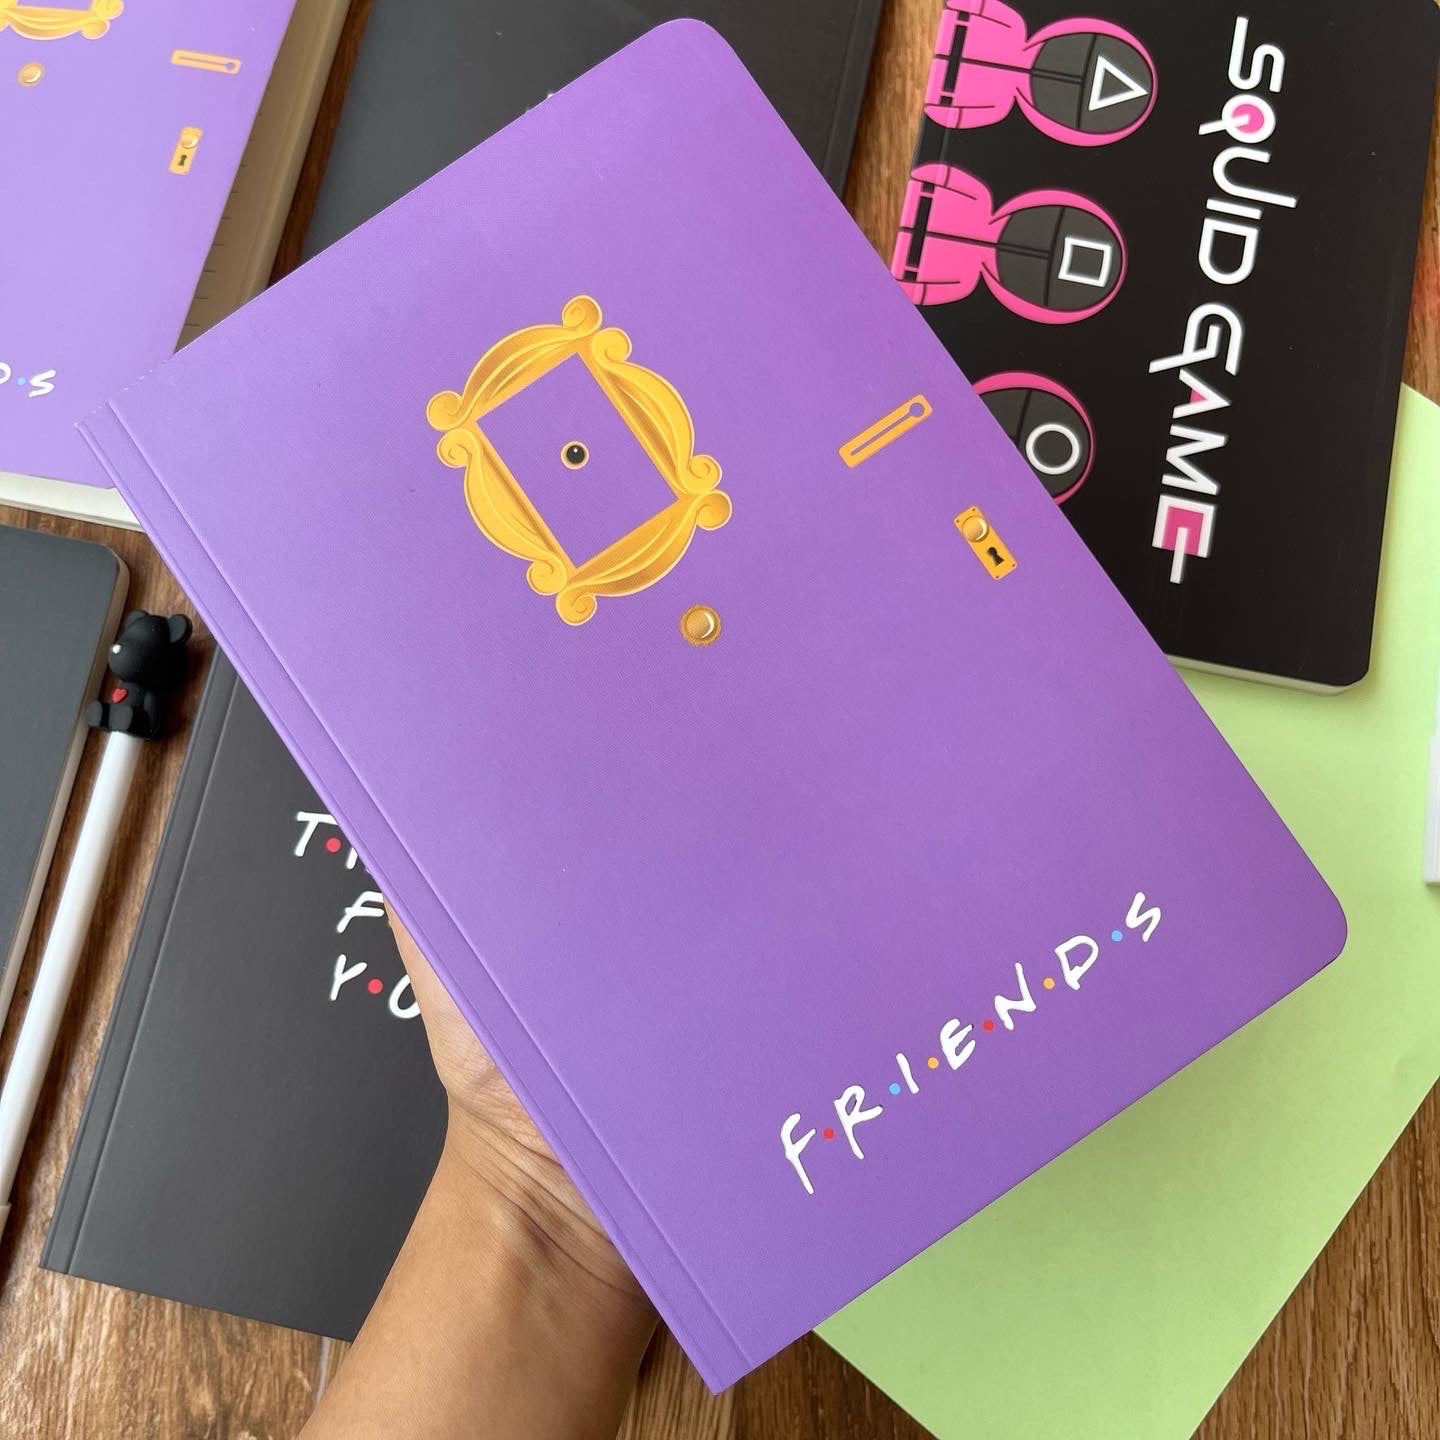 Friends Theme Diary/Notebook